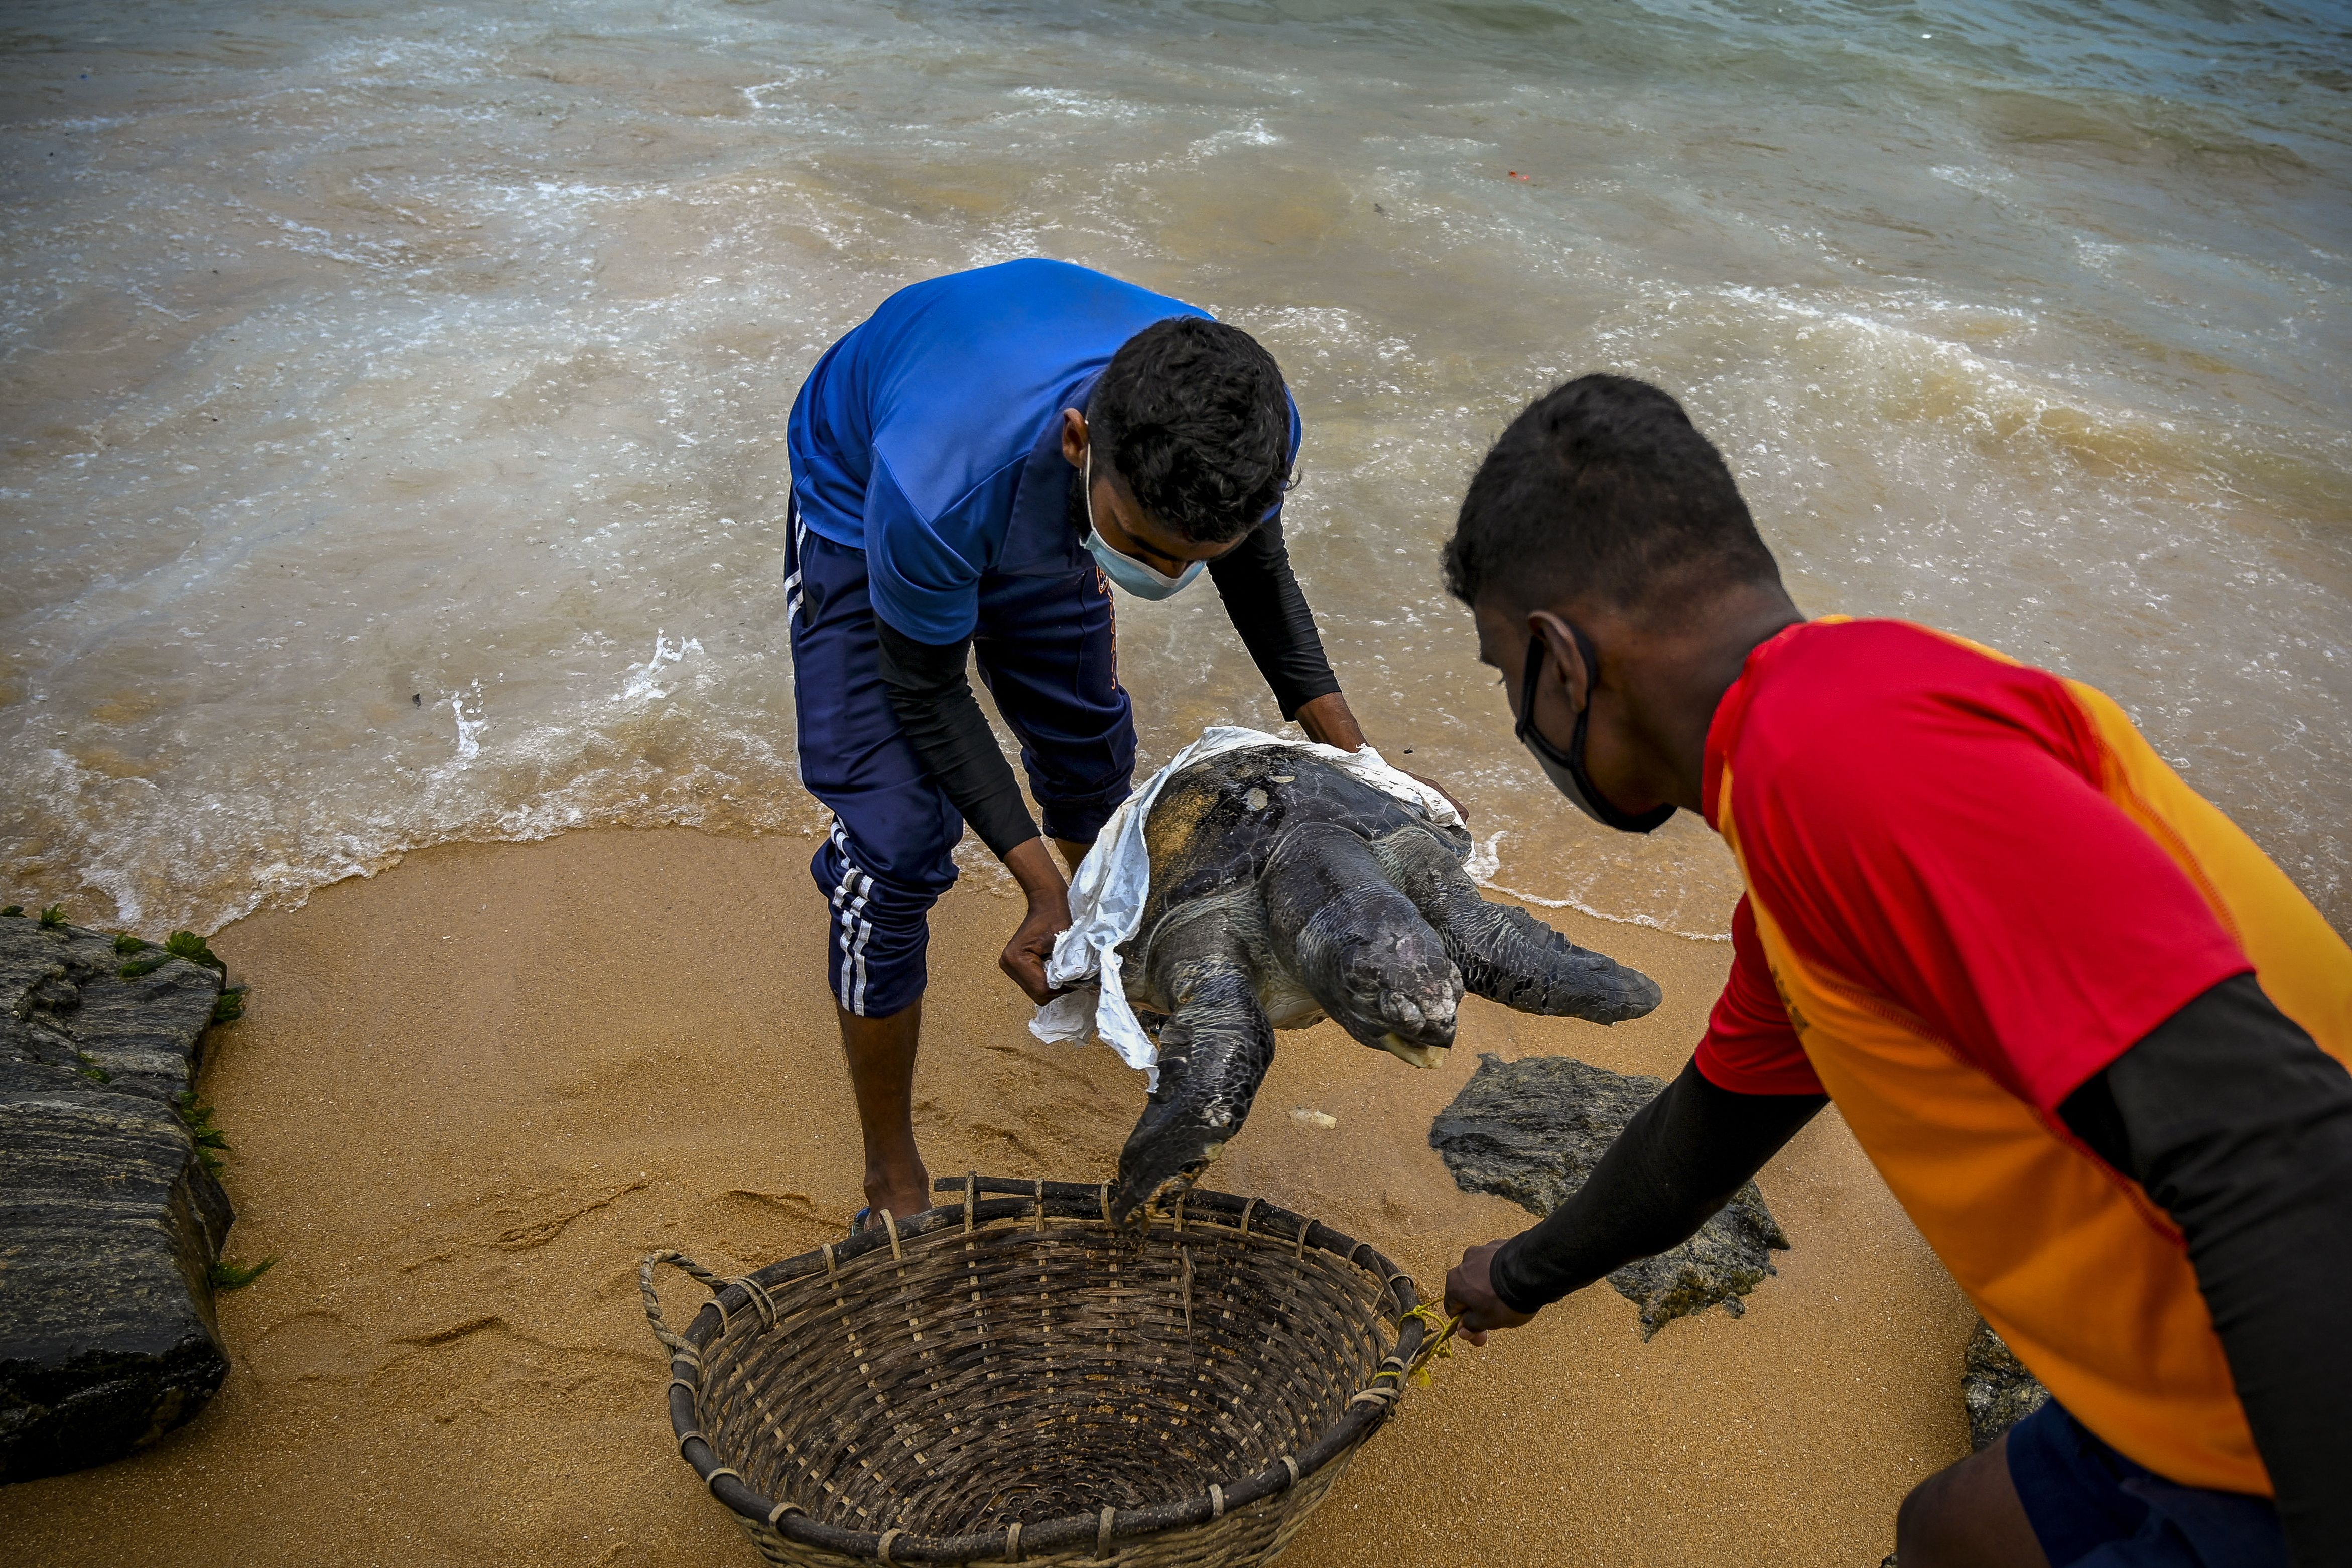 Coast Guard officials carry away the carcass of a turtle that was washed ashore at the Wellawatte beach, south of Sri Lanka’s capital Colombo on June 24, 2021.